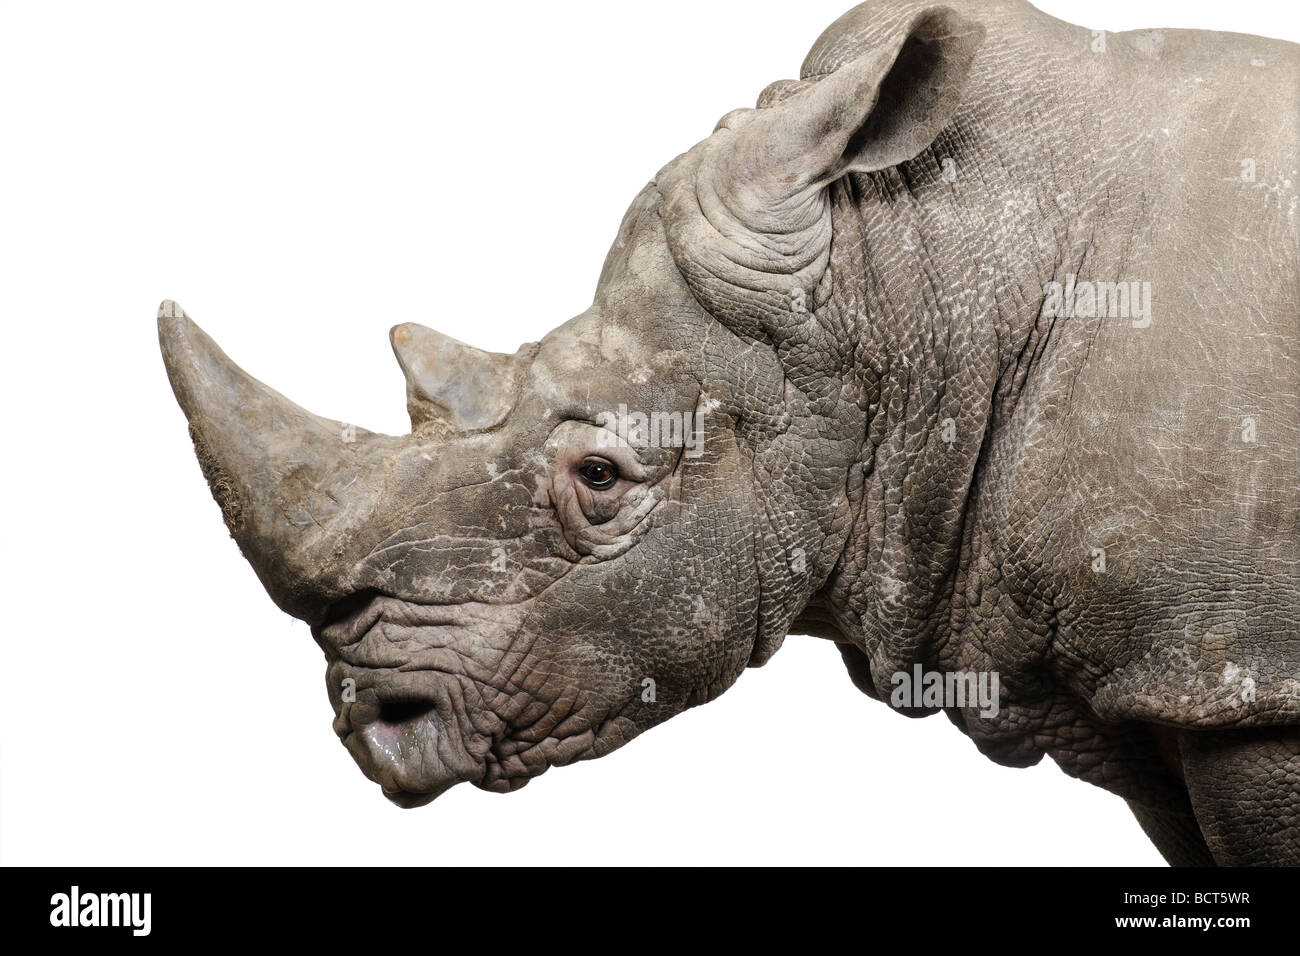 White Rhinoceros, Ceratotherium simum, 10 years old, in front of a white background, studio shot Stock Photo